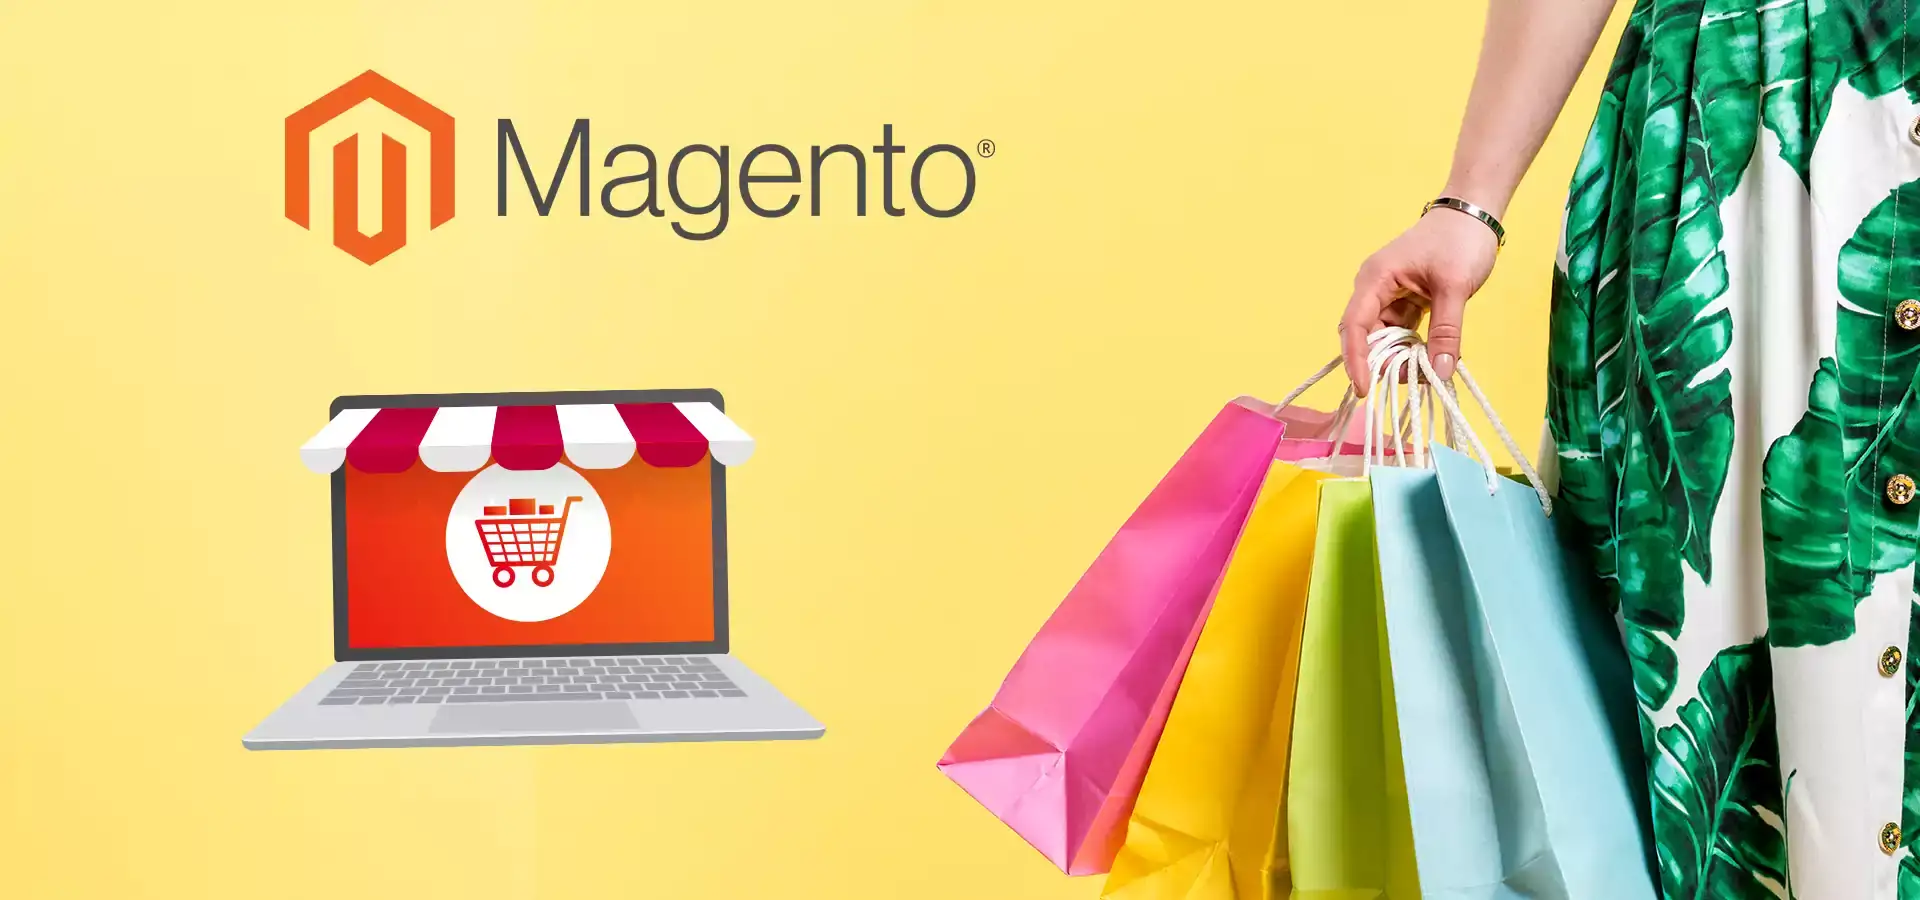 reasons-to-prove-that-magento-is-the-right-e-commerce-platform-related-blog-110